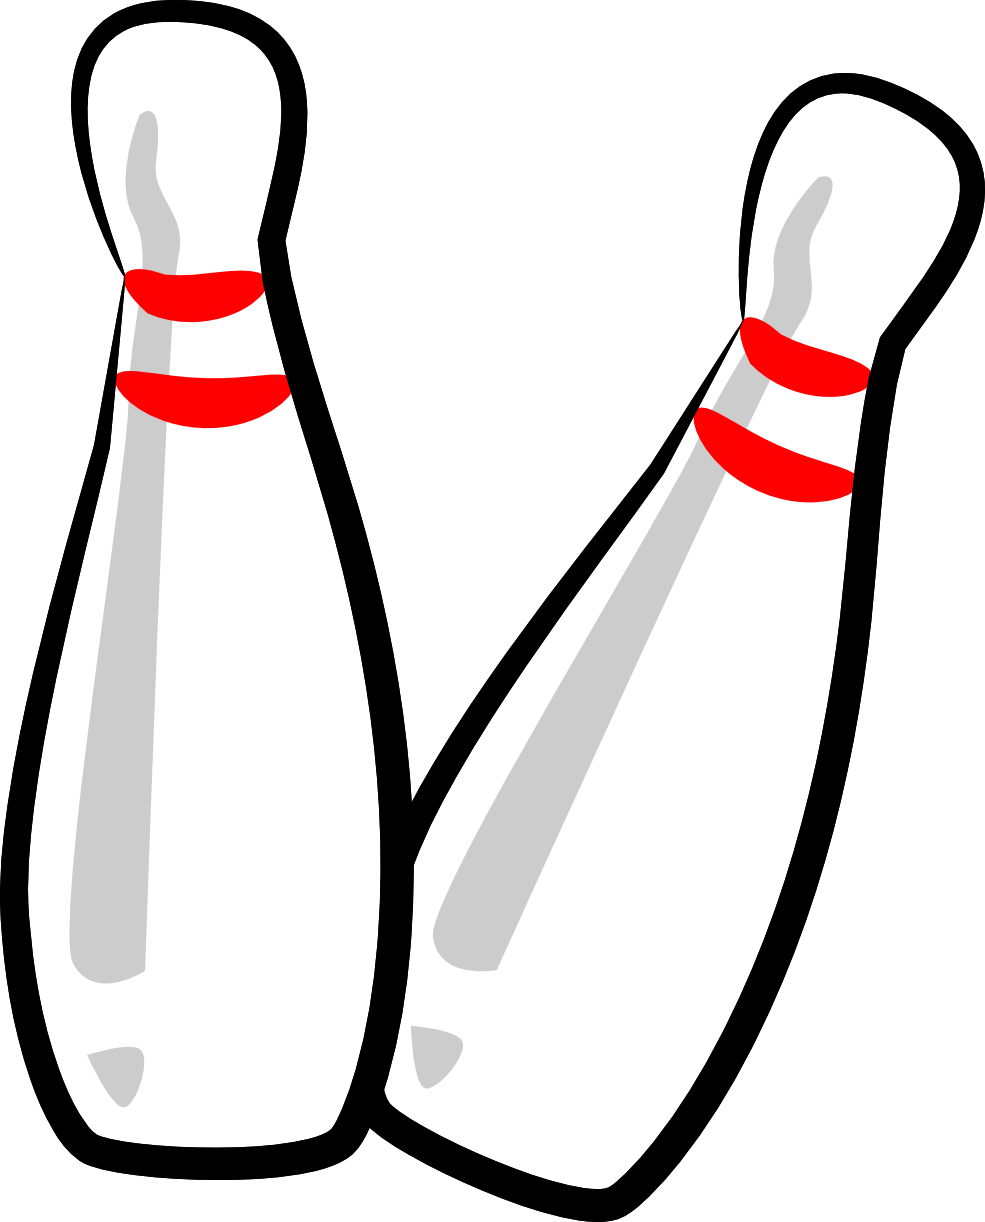 Group pizza cliparts zone. Floor clipart bowling alley